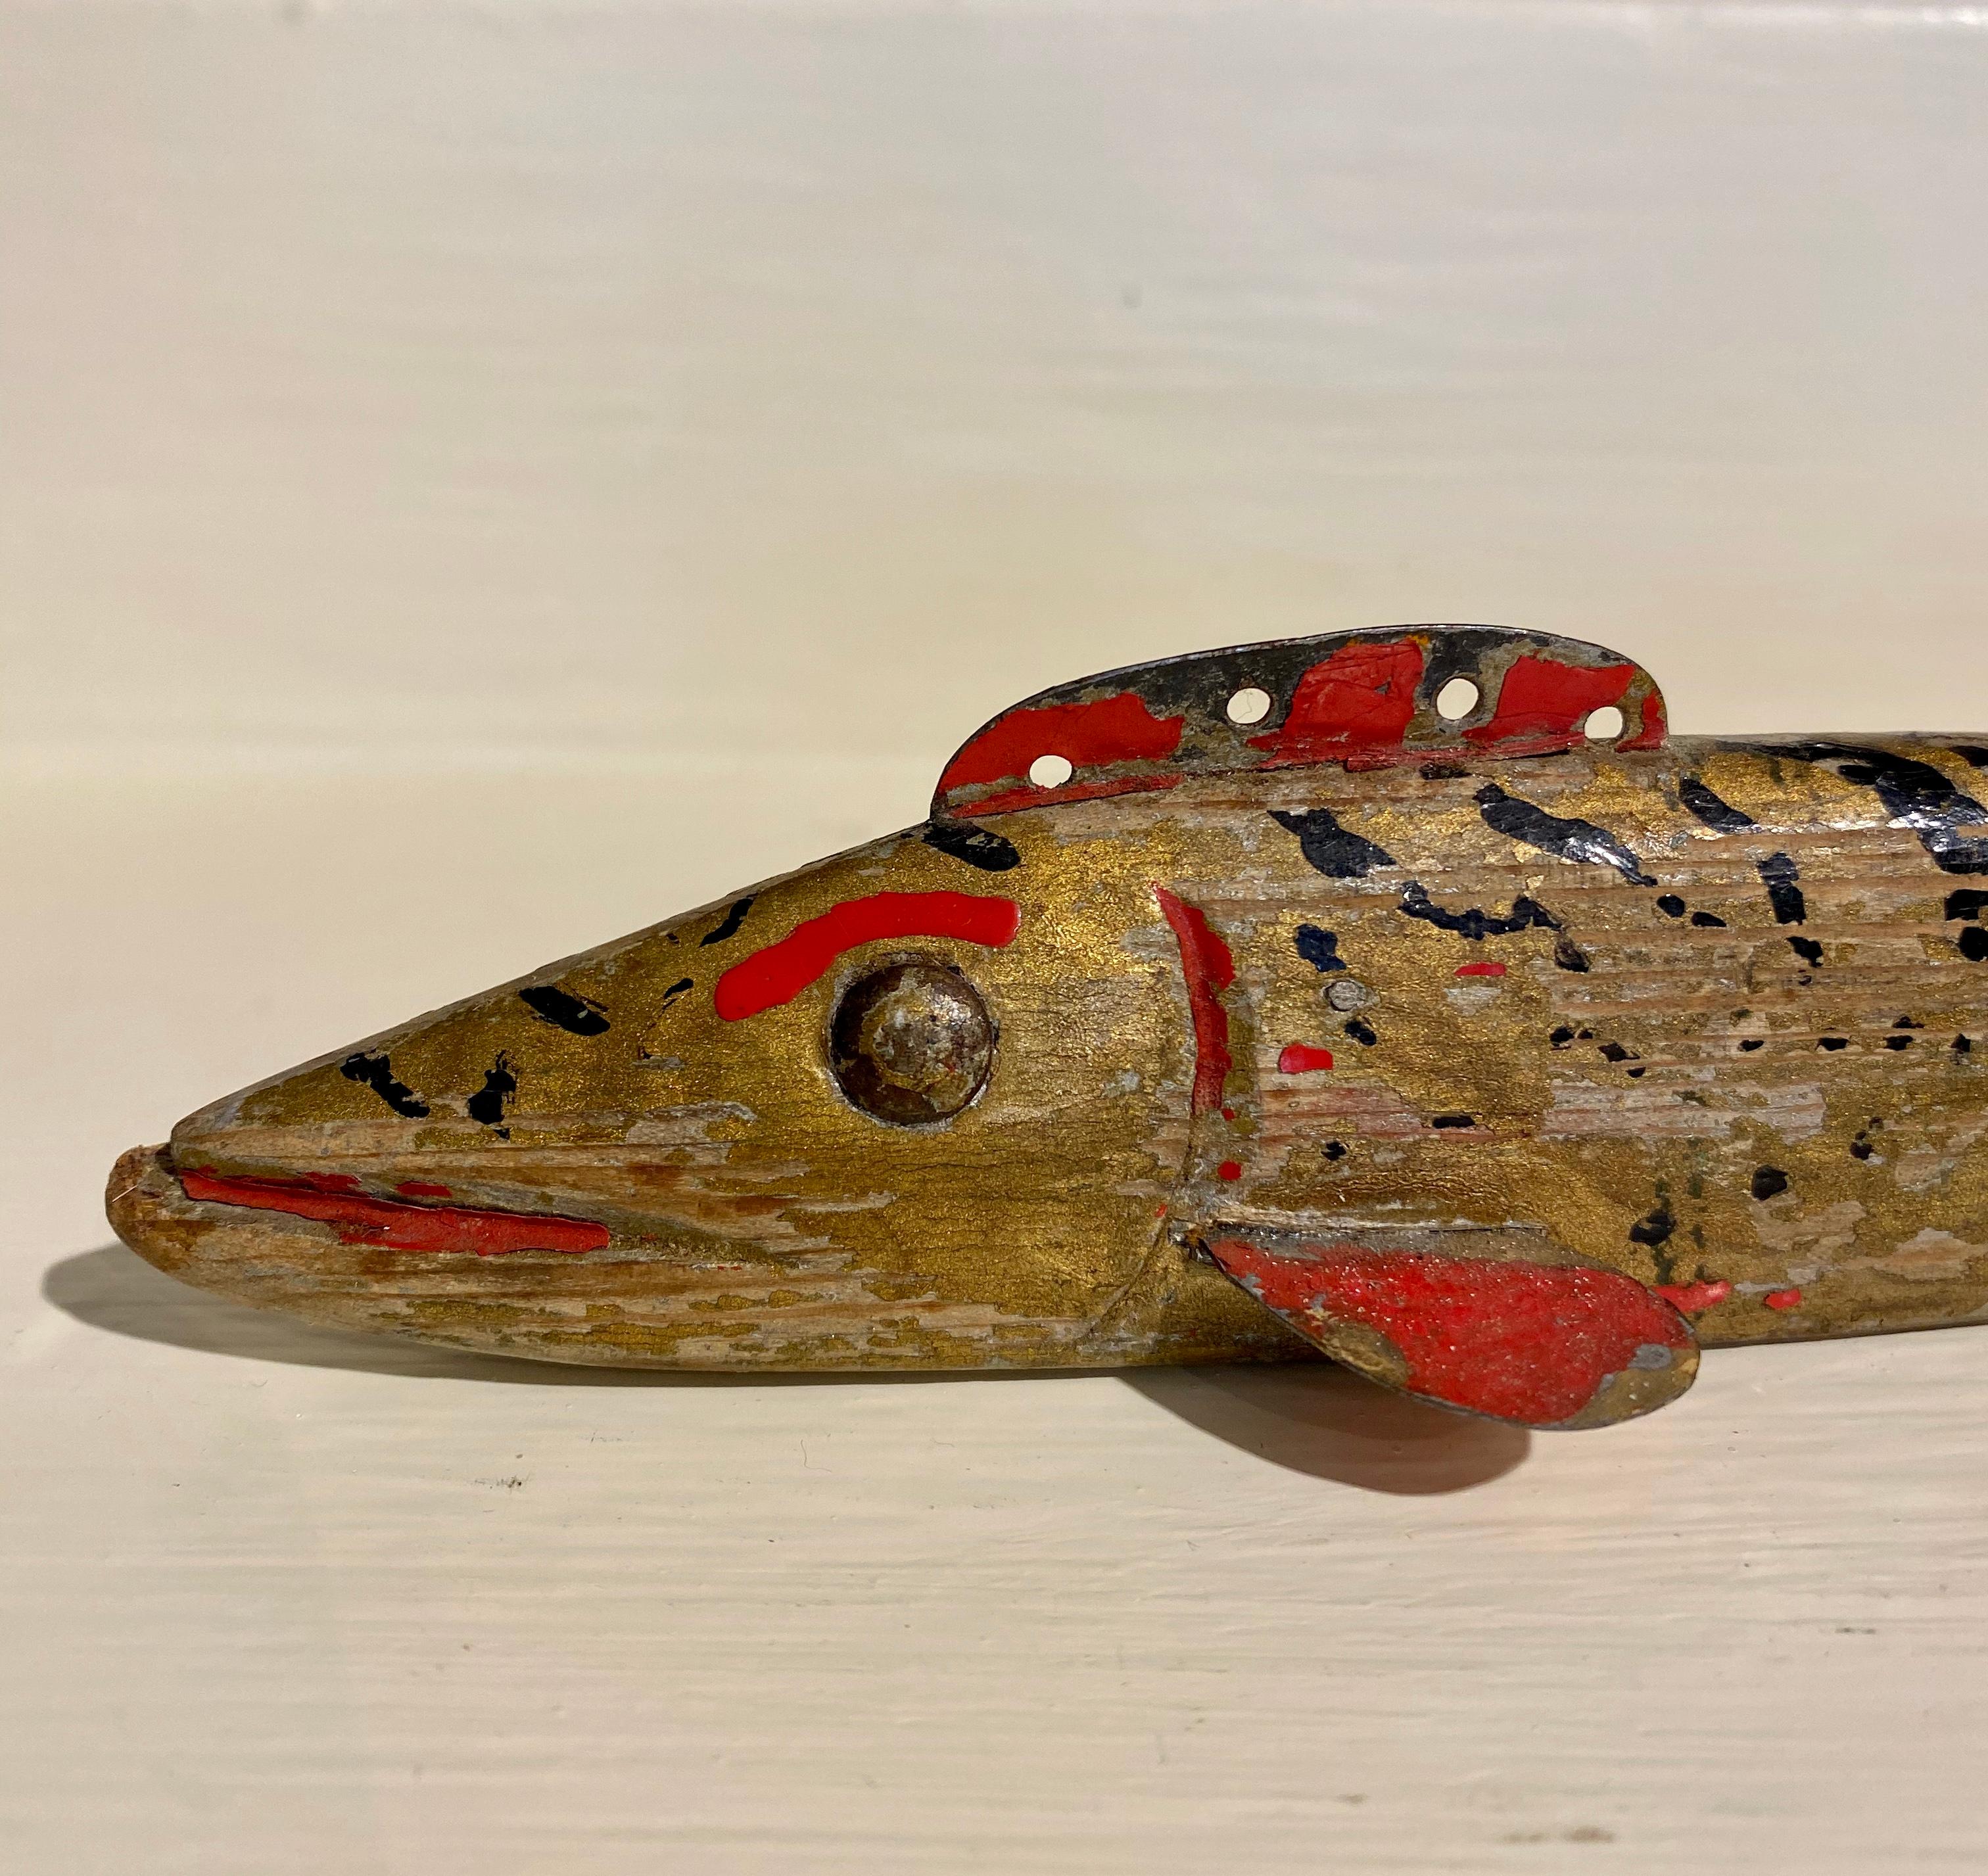 Oscar Peterson Brook Trout Decoy, Cadillac, Michigan, circa 1920s, an early Period II Peterson working ice fishing decoy painted in a Classic brook trout pattern with black and red squiggles and dots on a gold body, with red gills and mouth. The